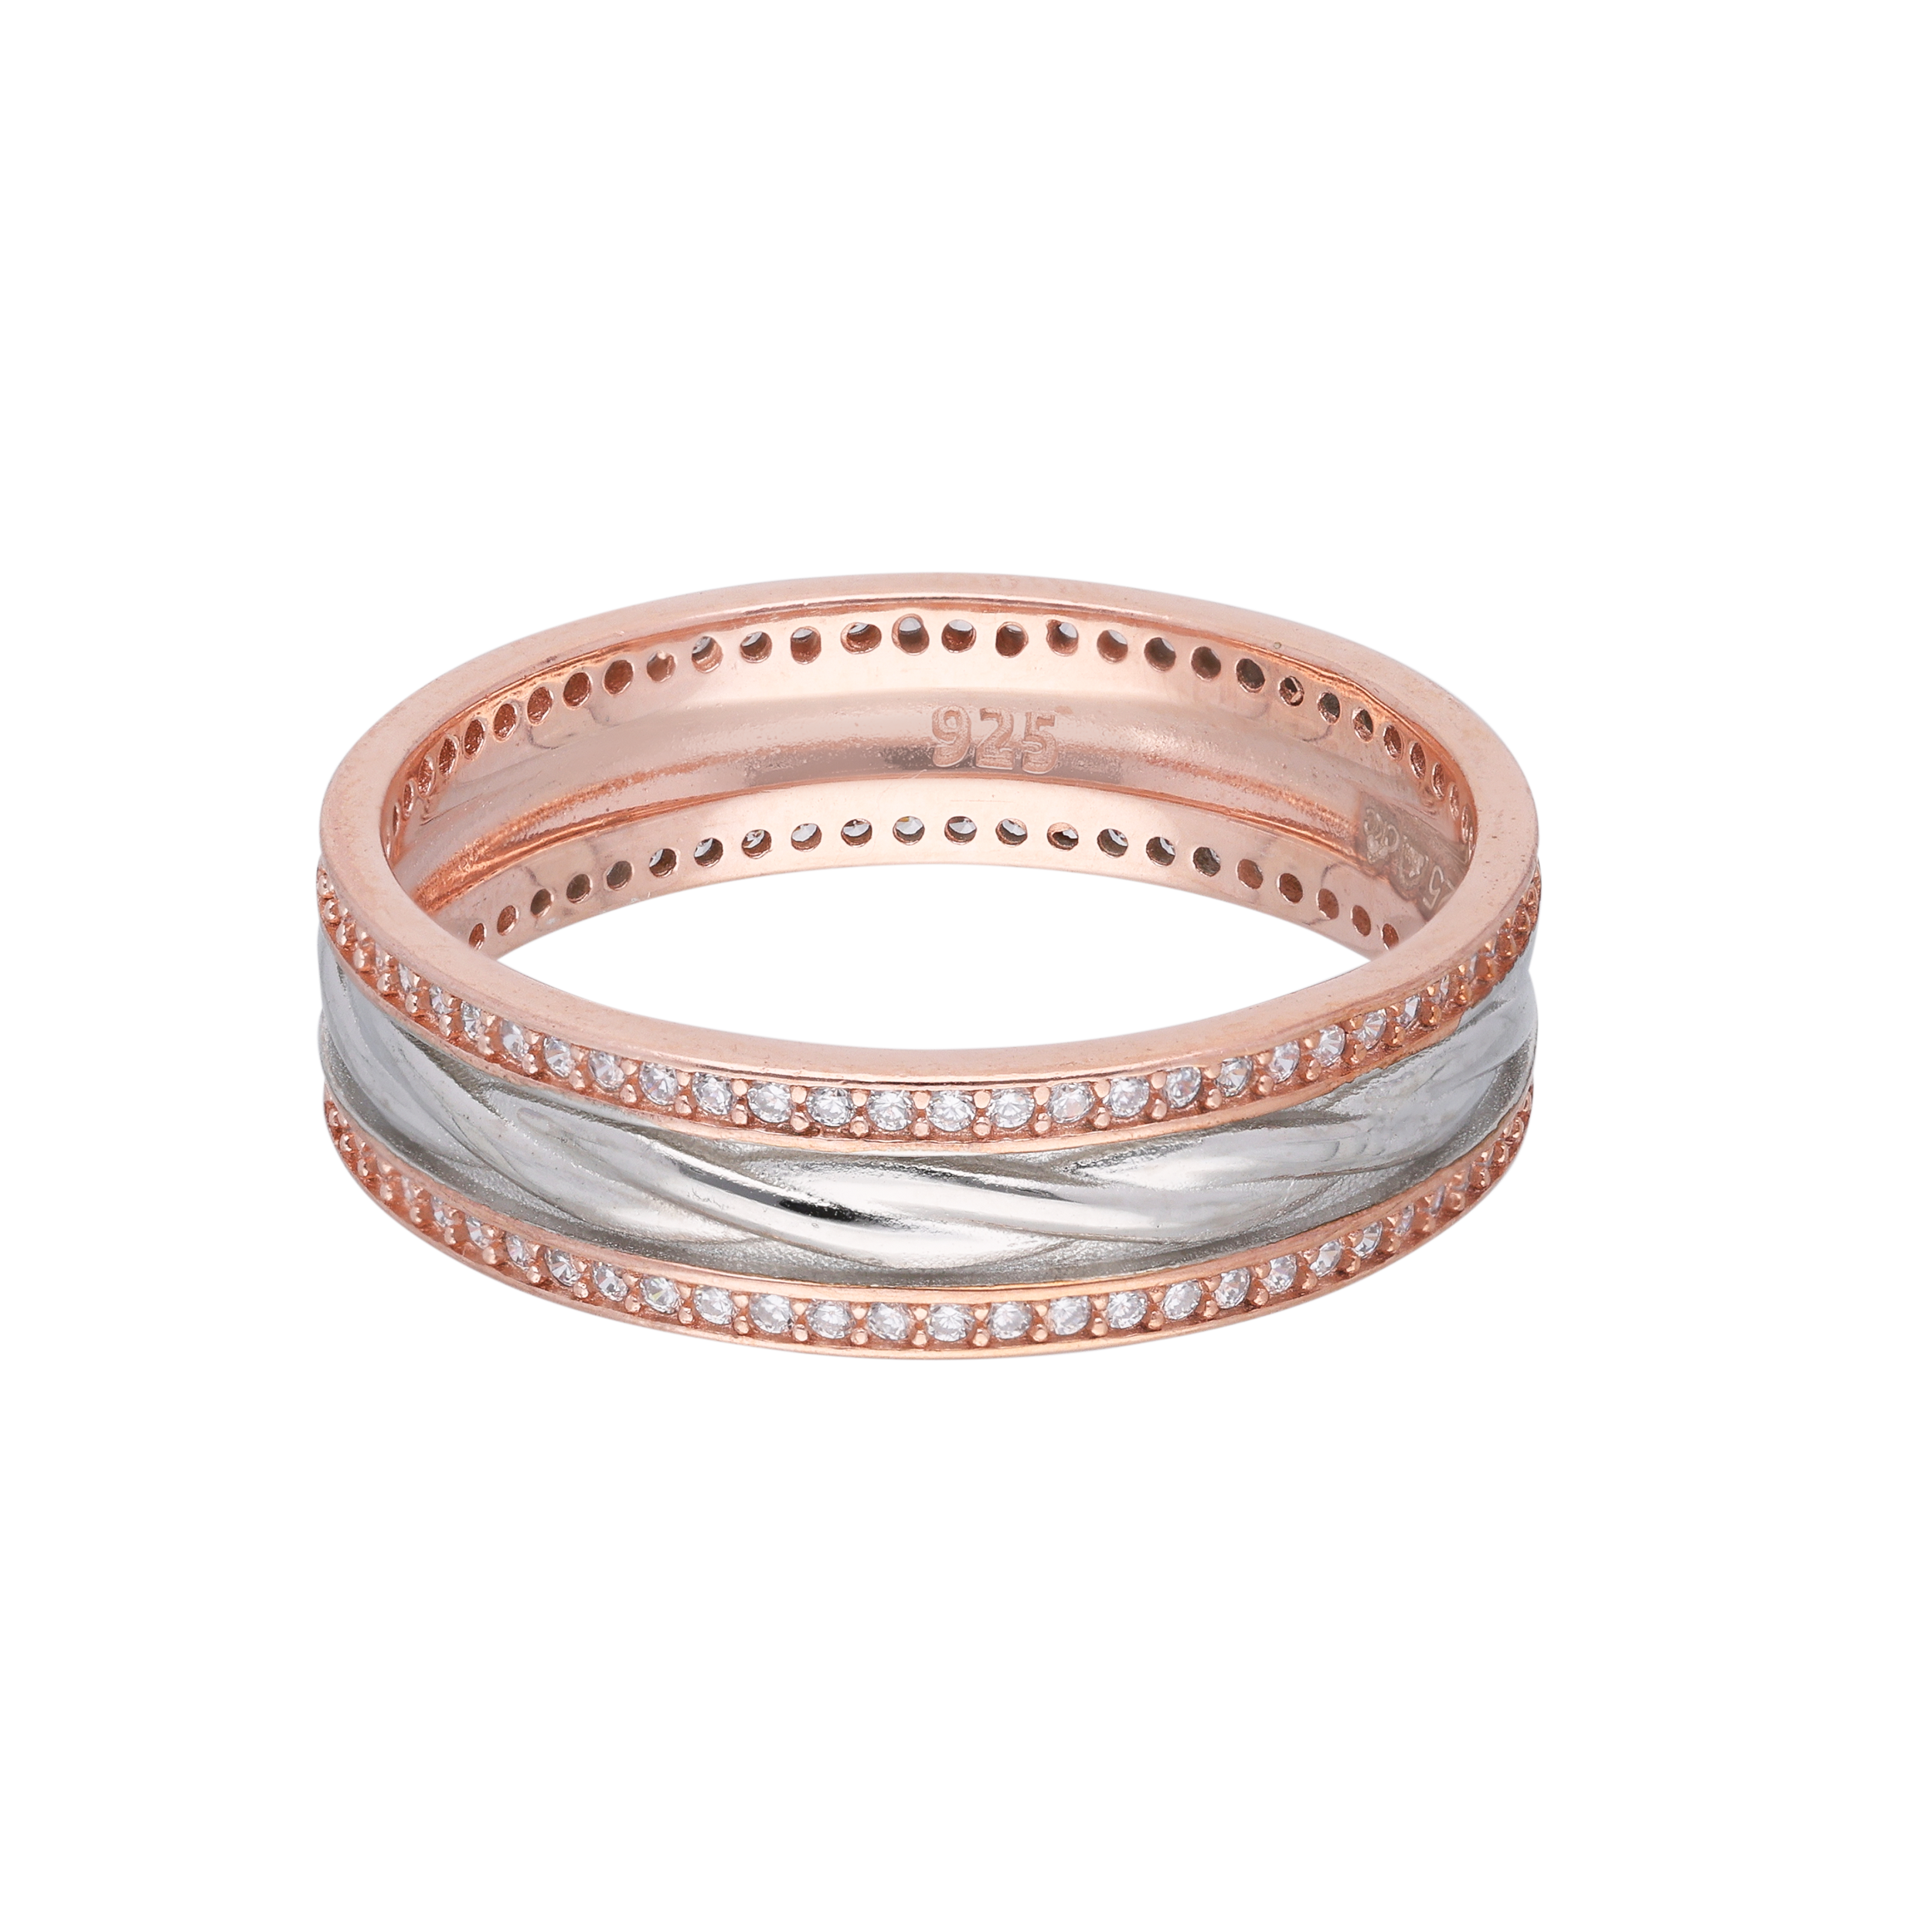 Contemporary Classic: Men's Sterling Silver Band Ring | SKU: 0019767895, 0019767918, 0019767925, 0019767932, 0019767901